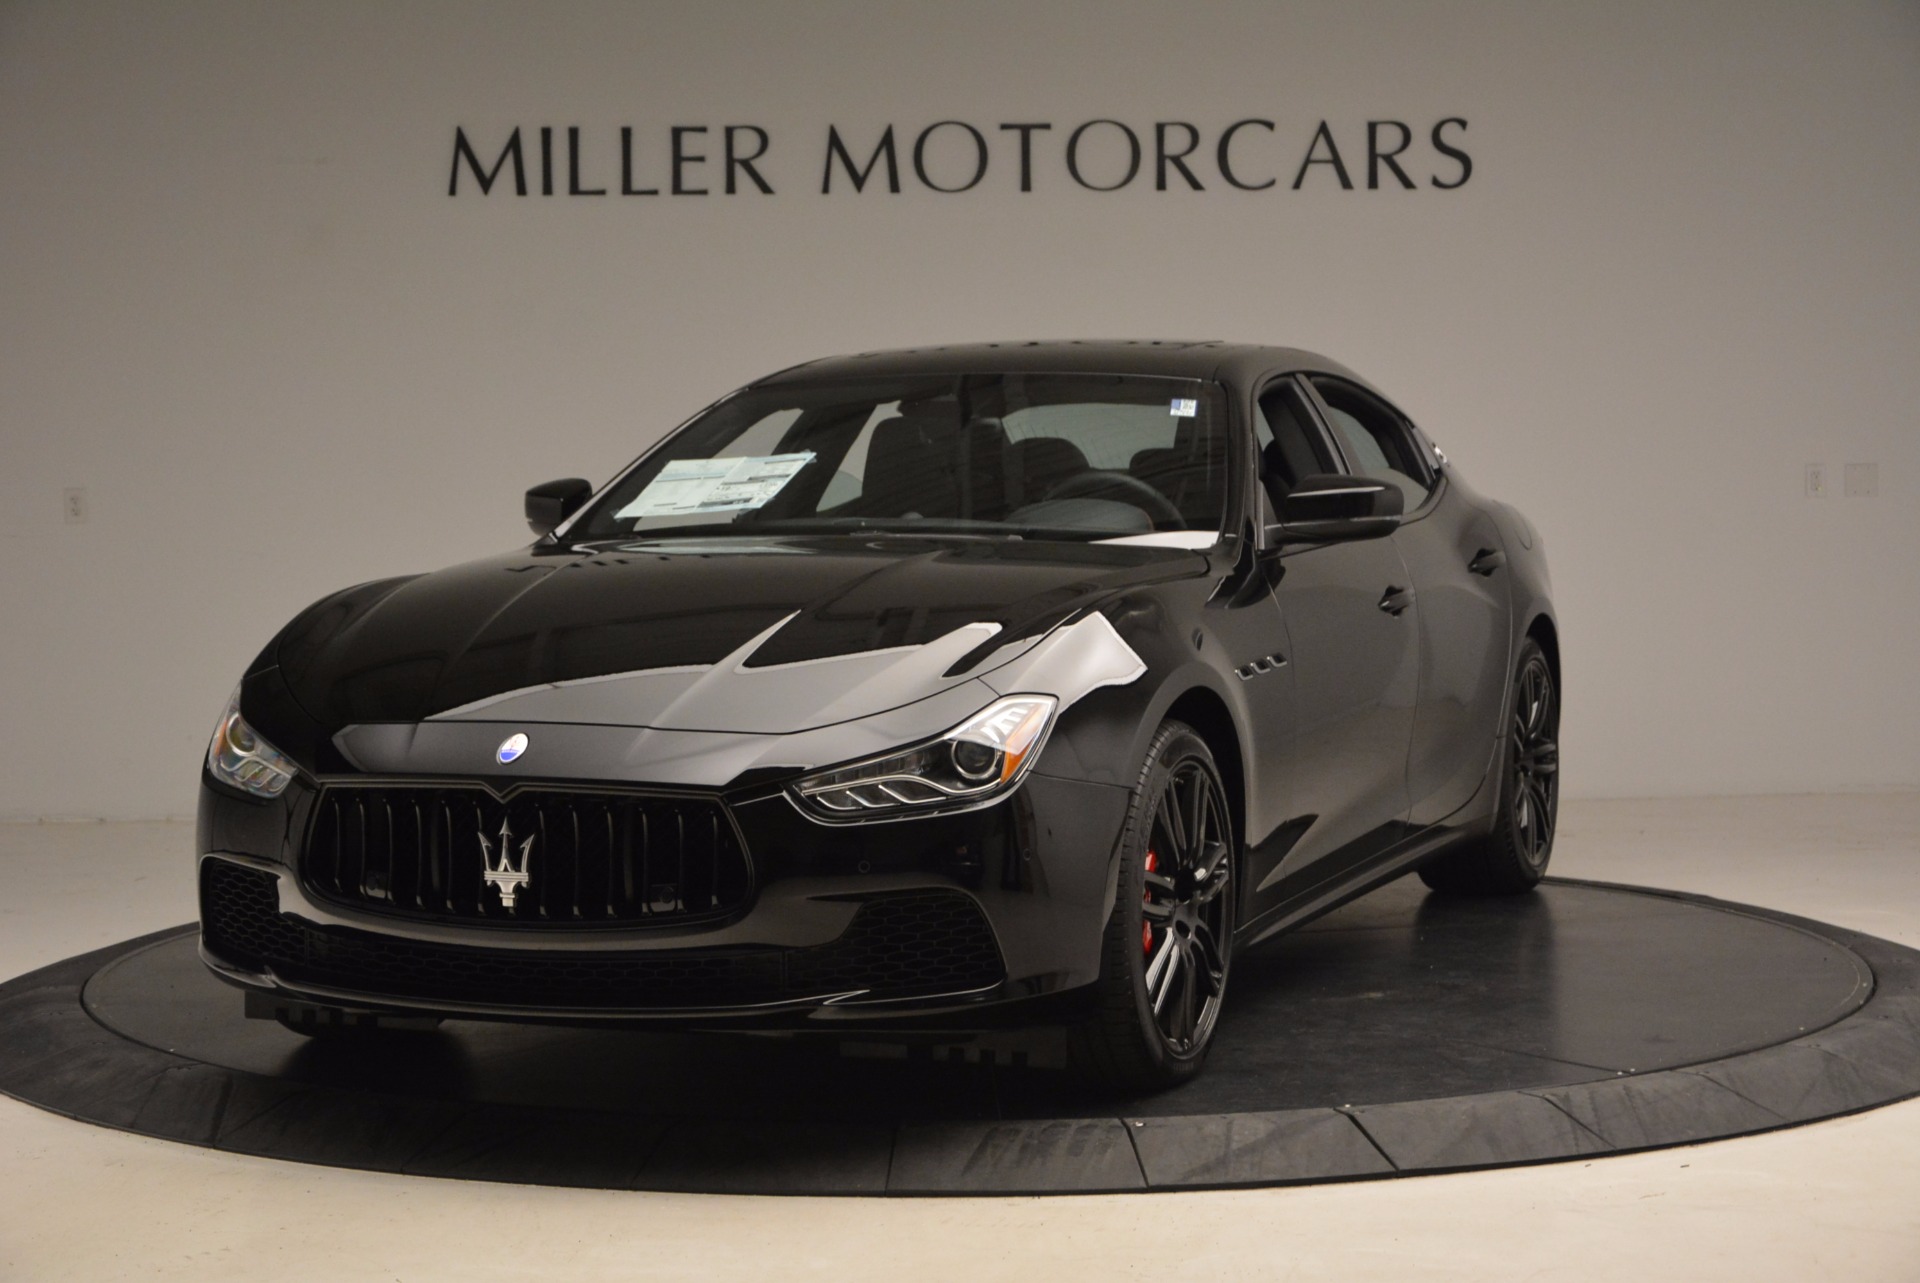 New 2017 Maserati Ghibli Nerissimo Edition S Q4 for sale Sold at Rolls-Royce Motor Cars Greenwich in Greenwich CT 06830 1